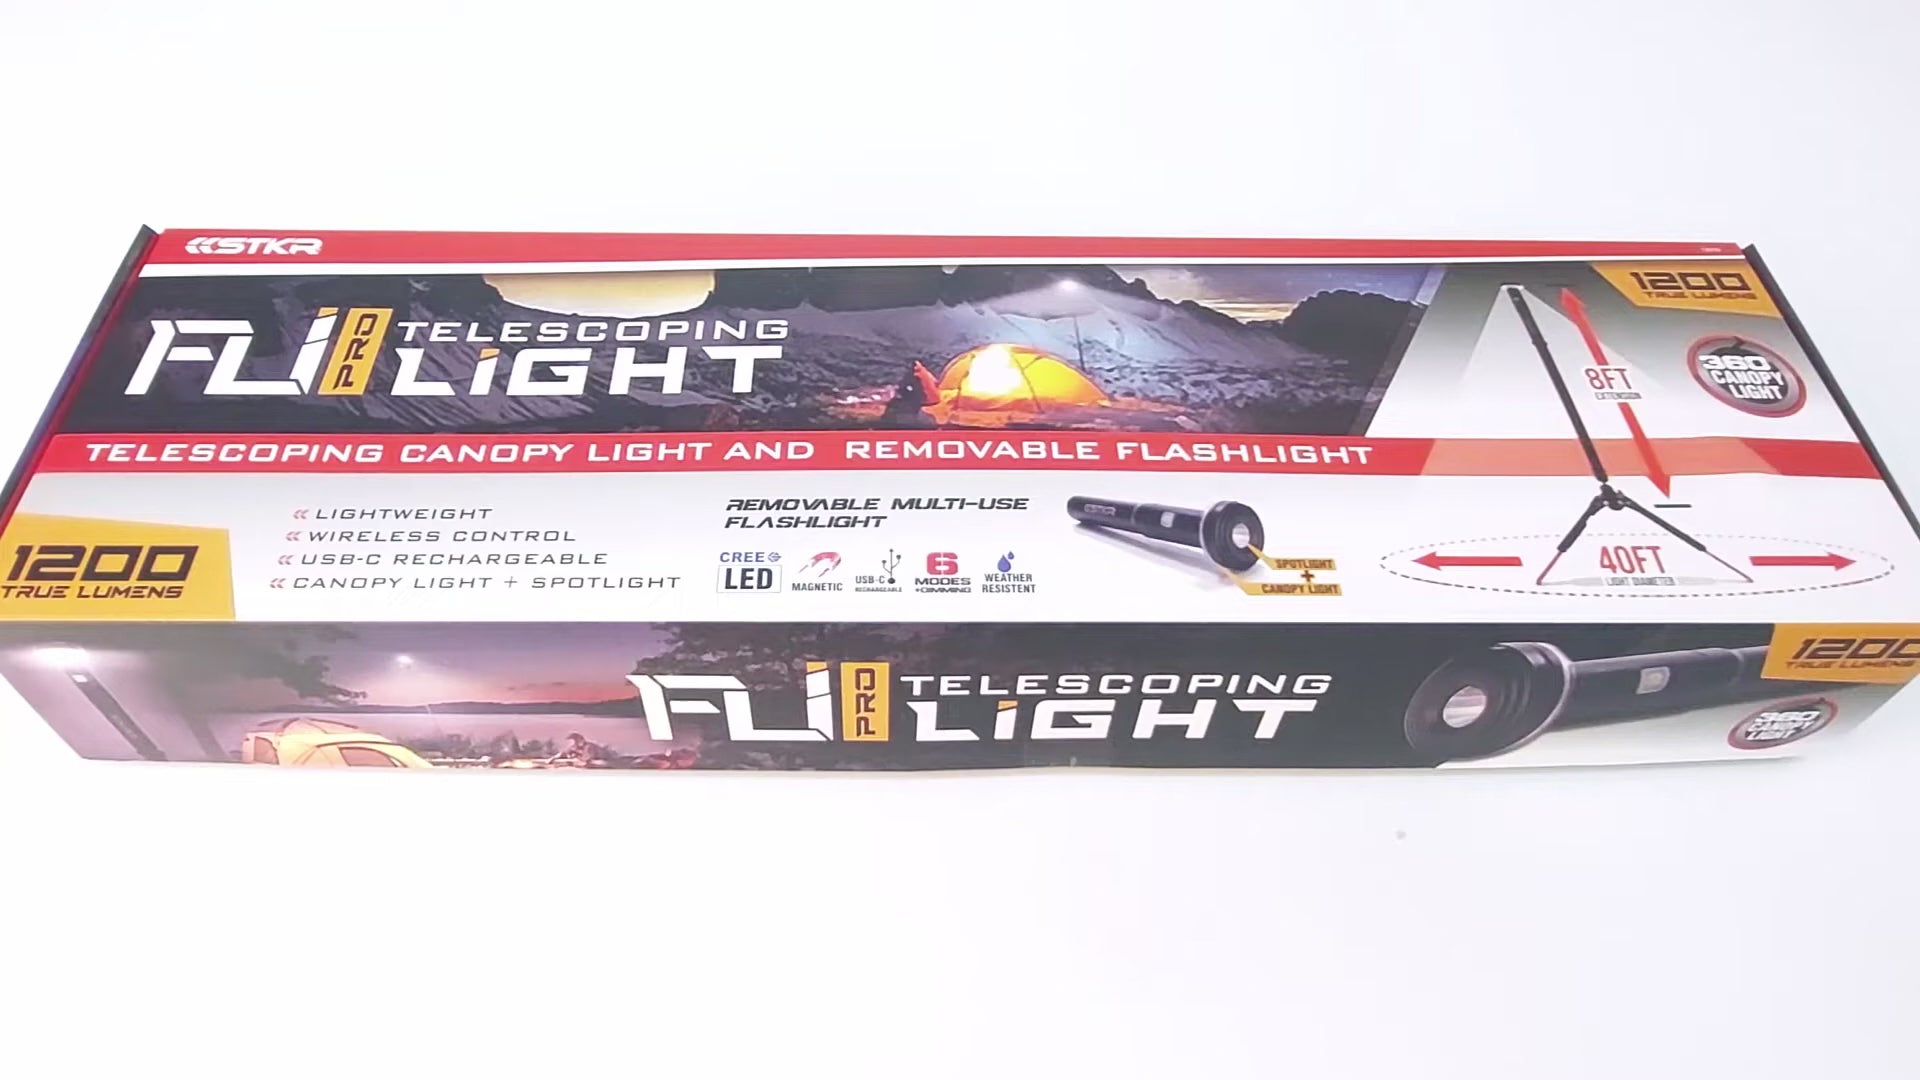 Unboxing video of the FLEXIT HEADLAMP PRO 6.5